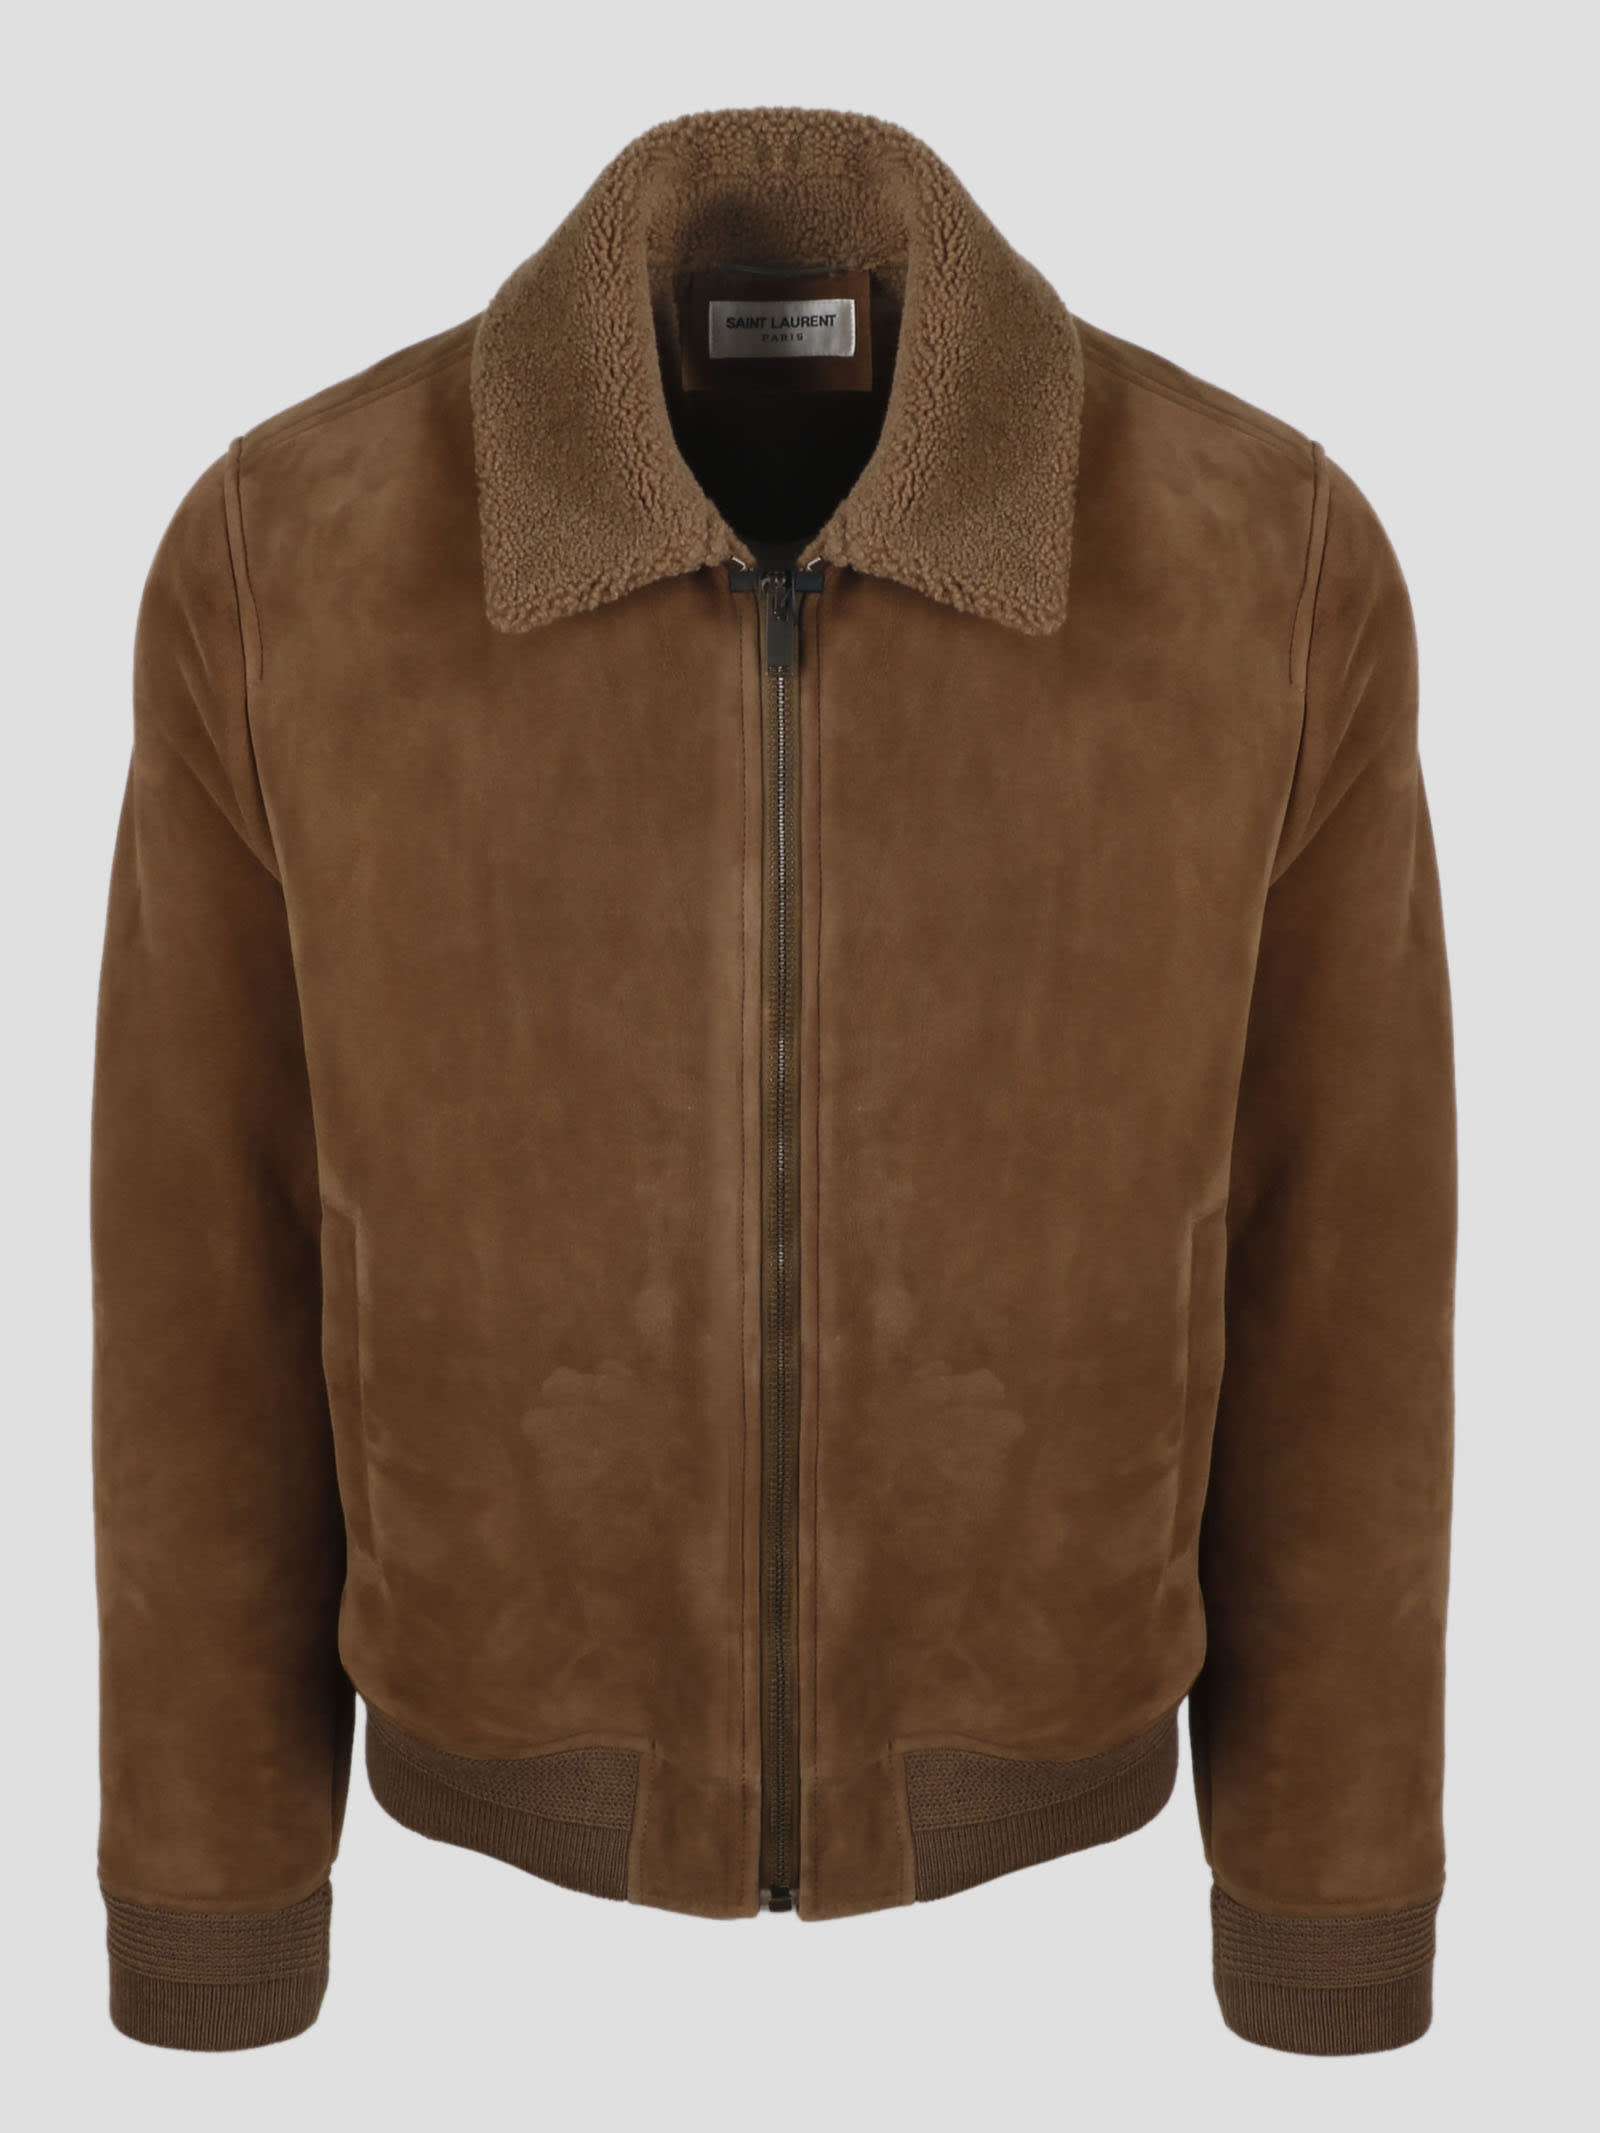 Saint Laurent Suede And Shearling Bomber Jacket